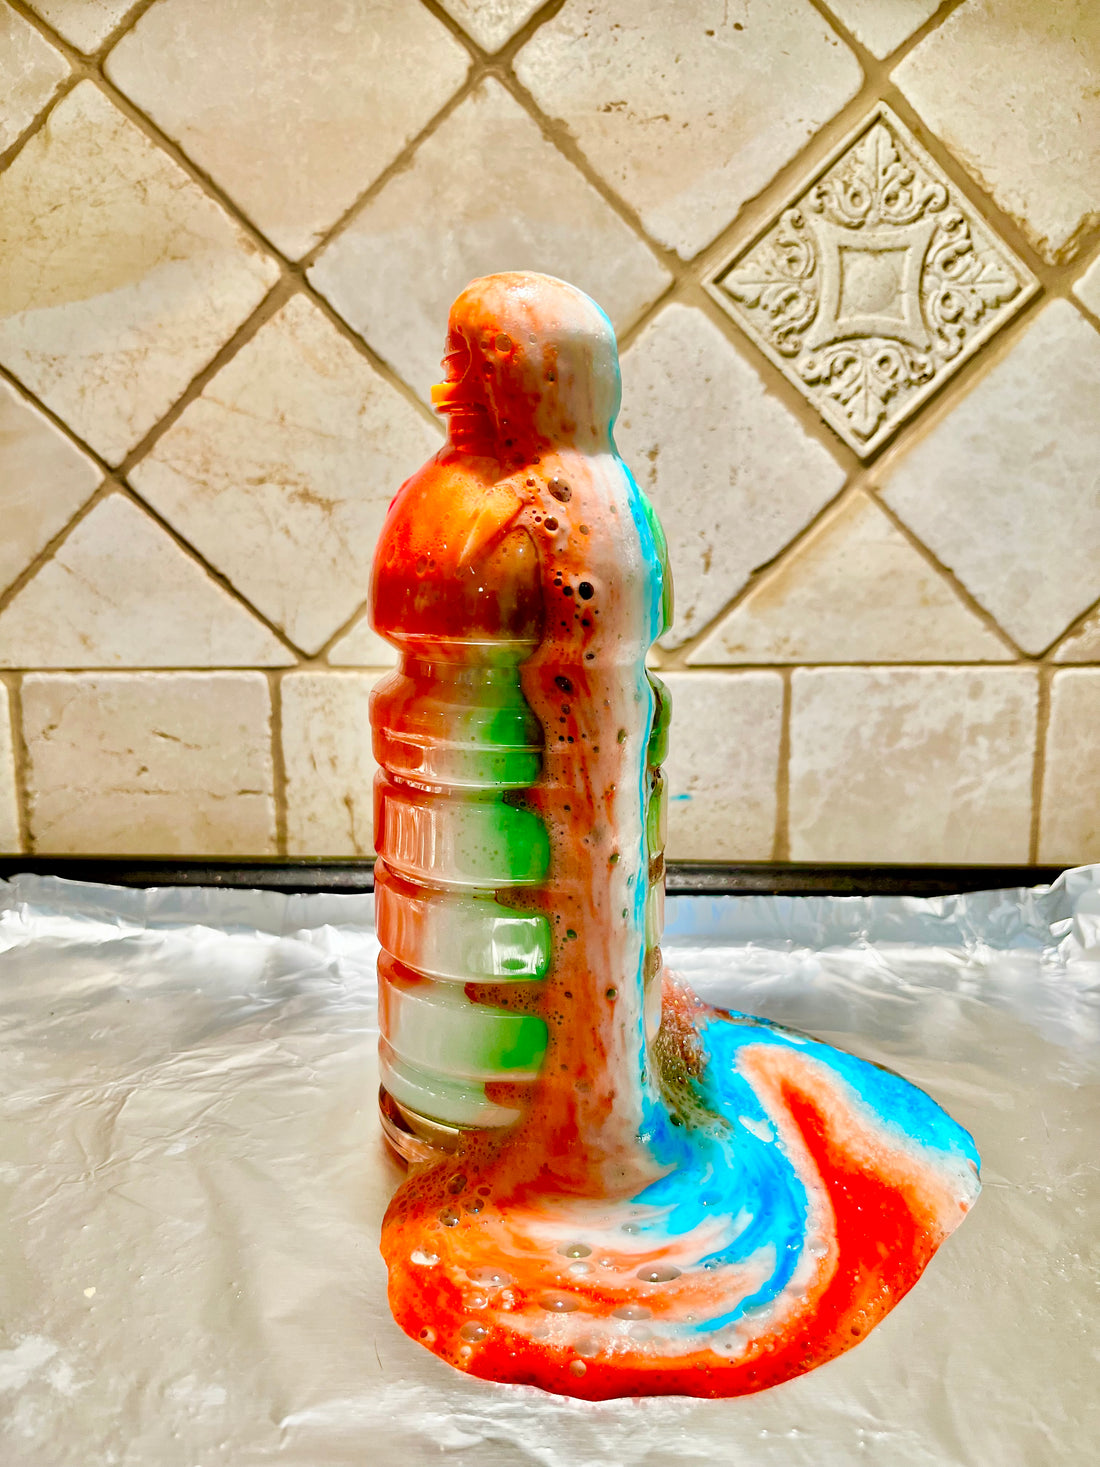 Elephant Toothpaste: A Fun and Fiery Science Experiment